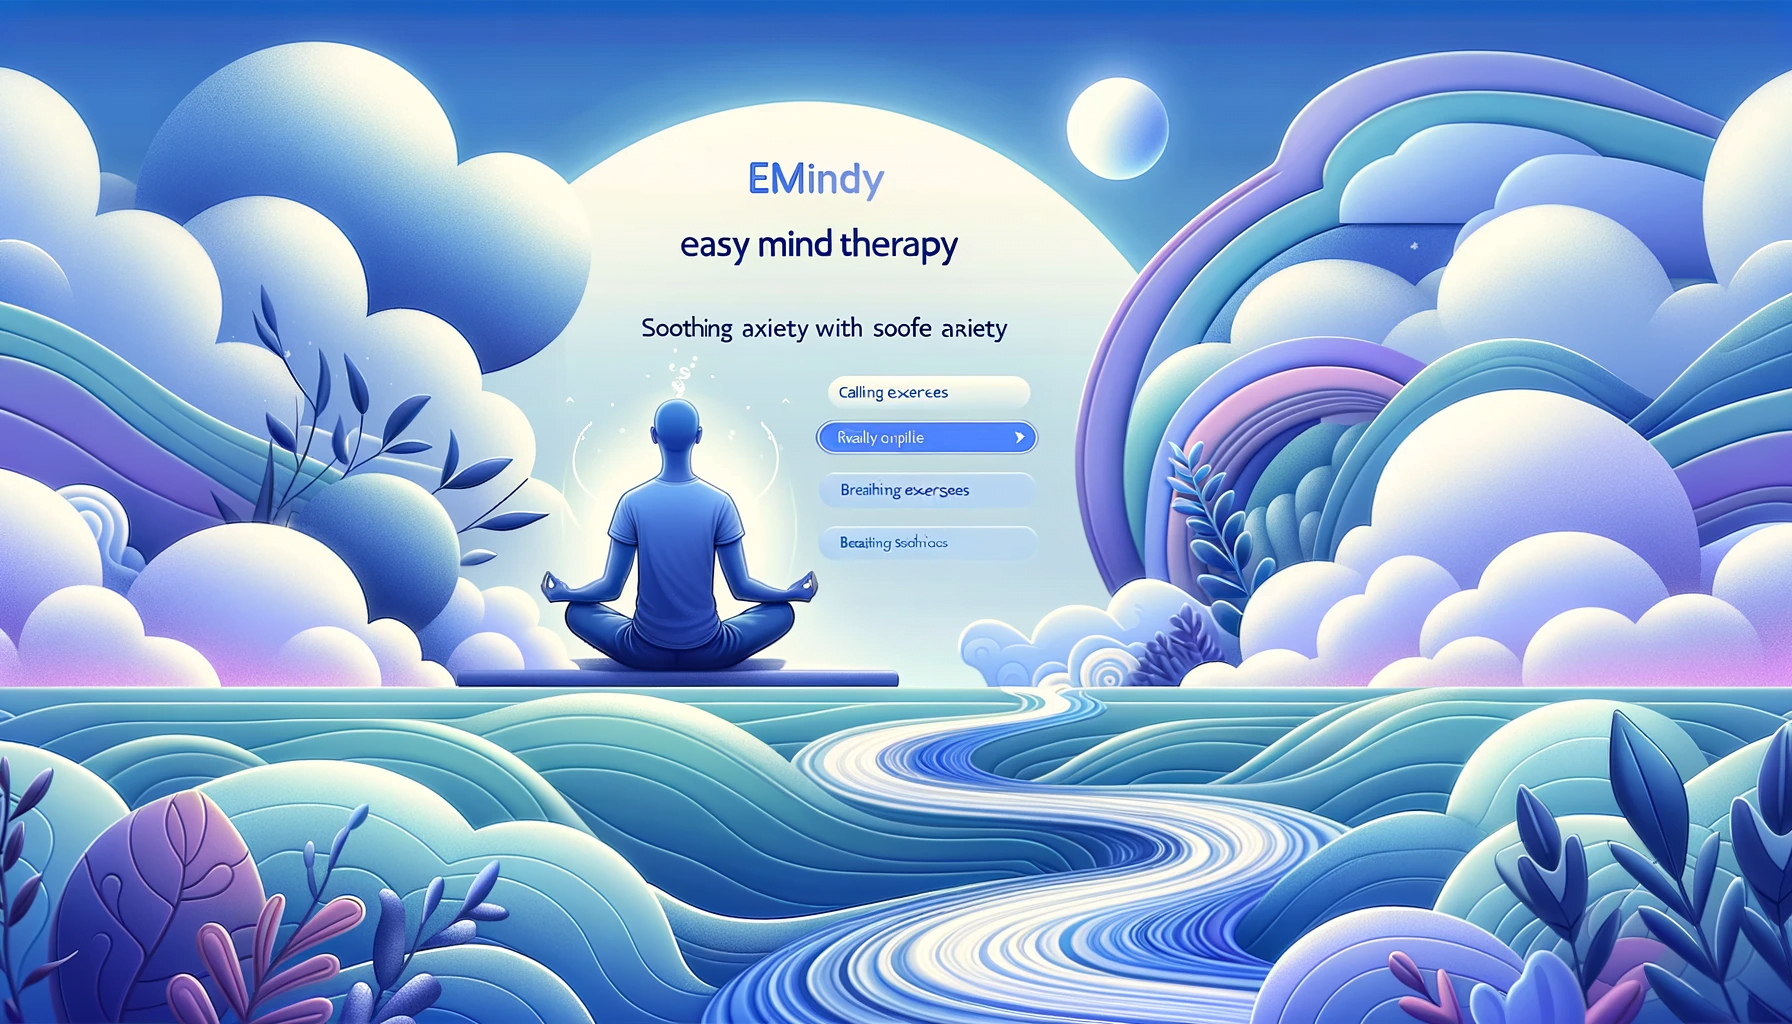 eMINDy: Soothing Anxiety with Easy Mind Therapy